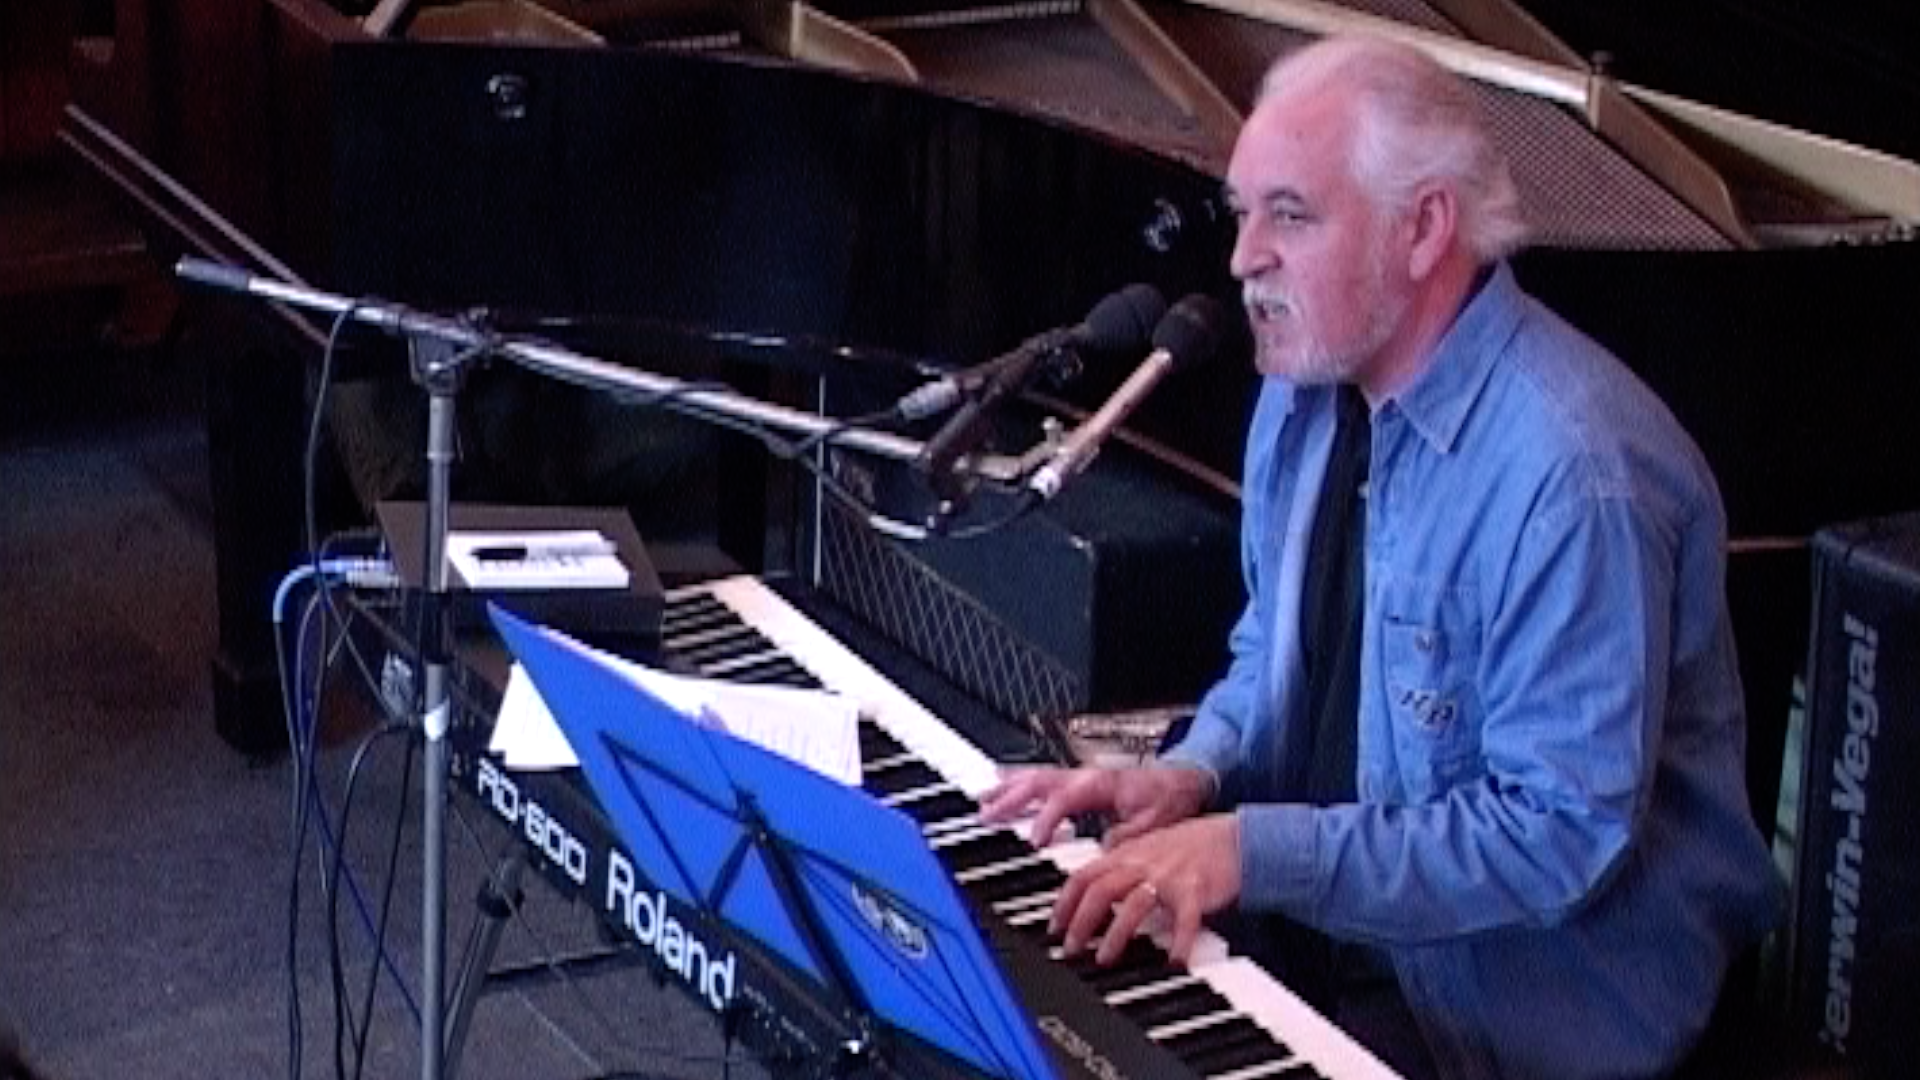 In Session with Procol Harum